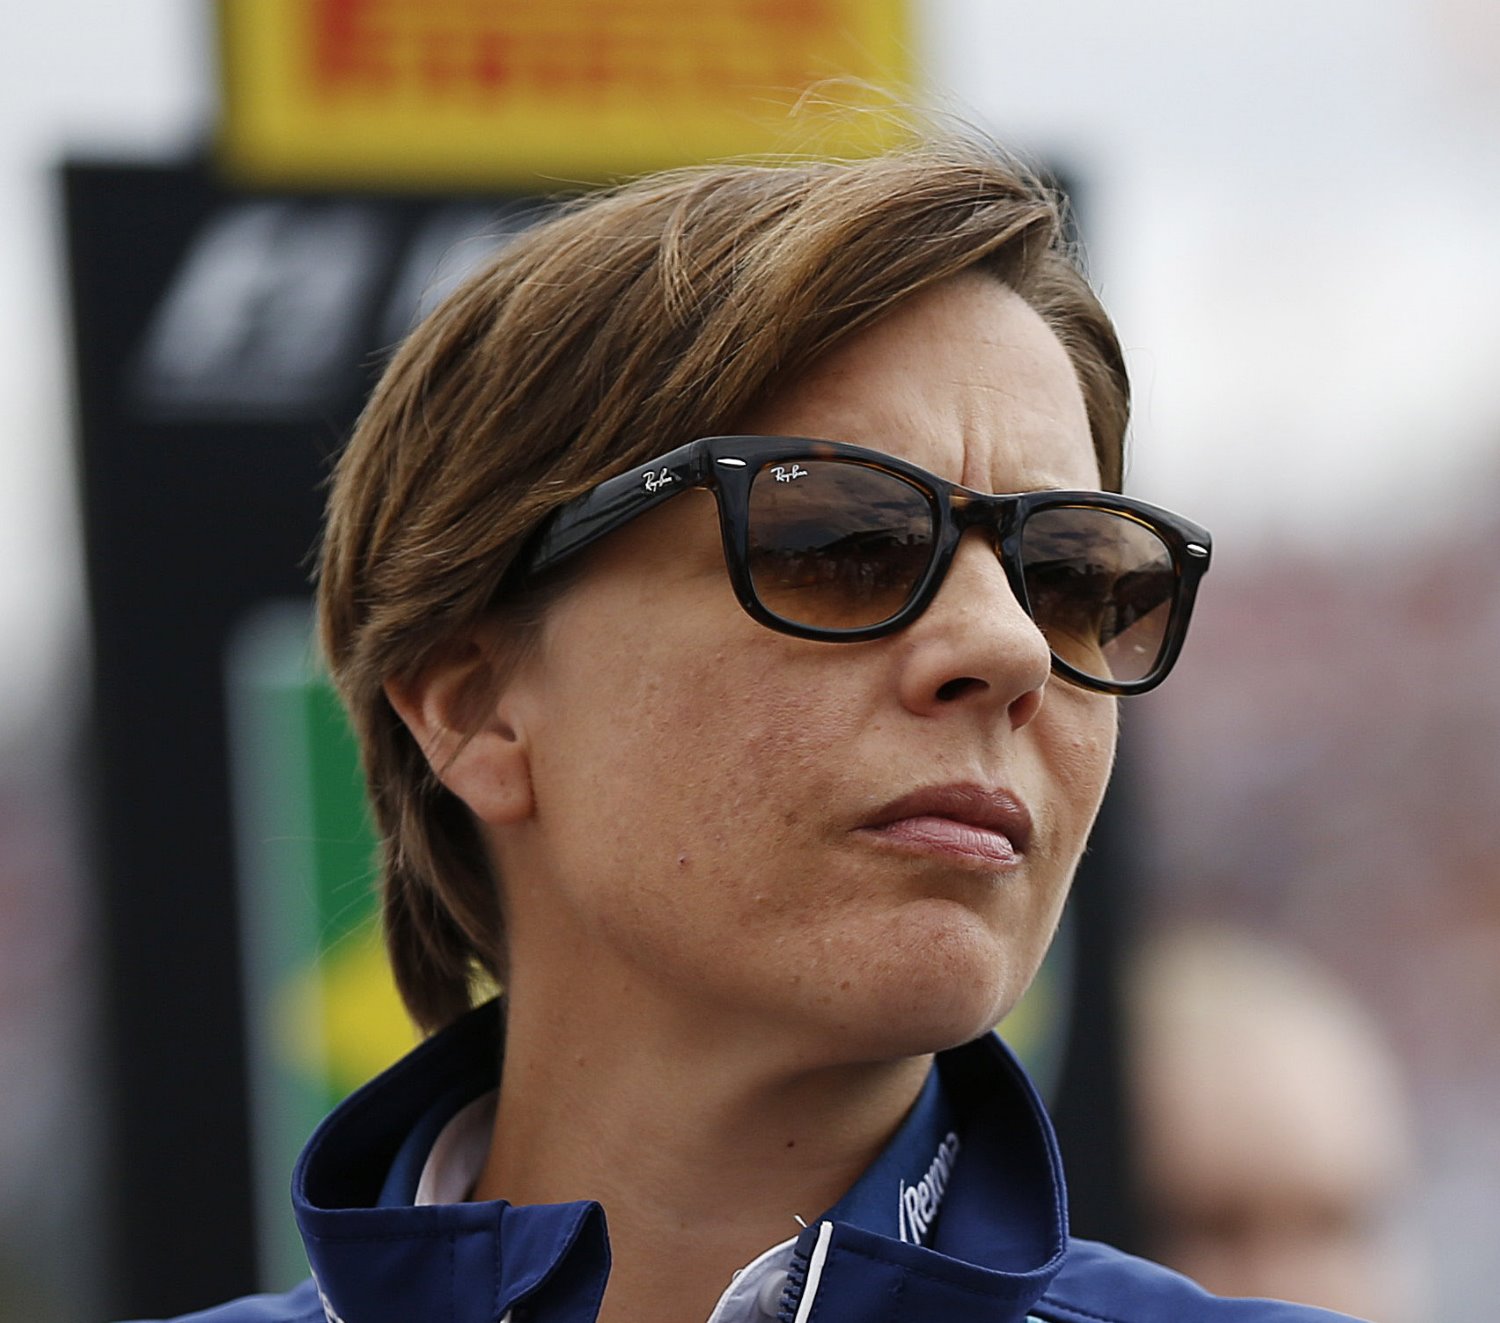 After running Williams into the ground at the back of the grid, Claire WIlliams may go back to baking cookies